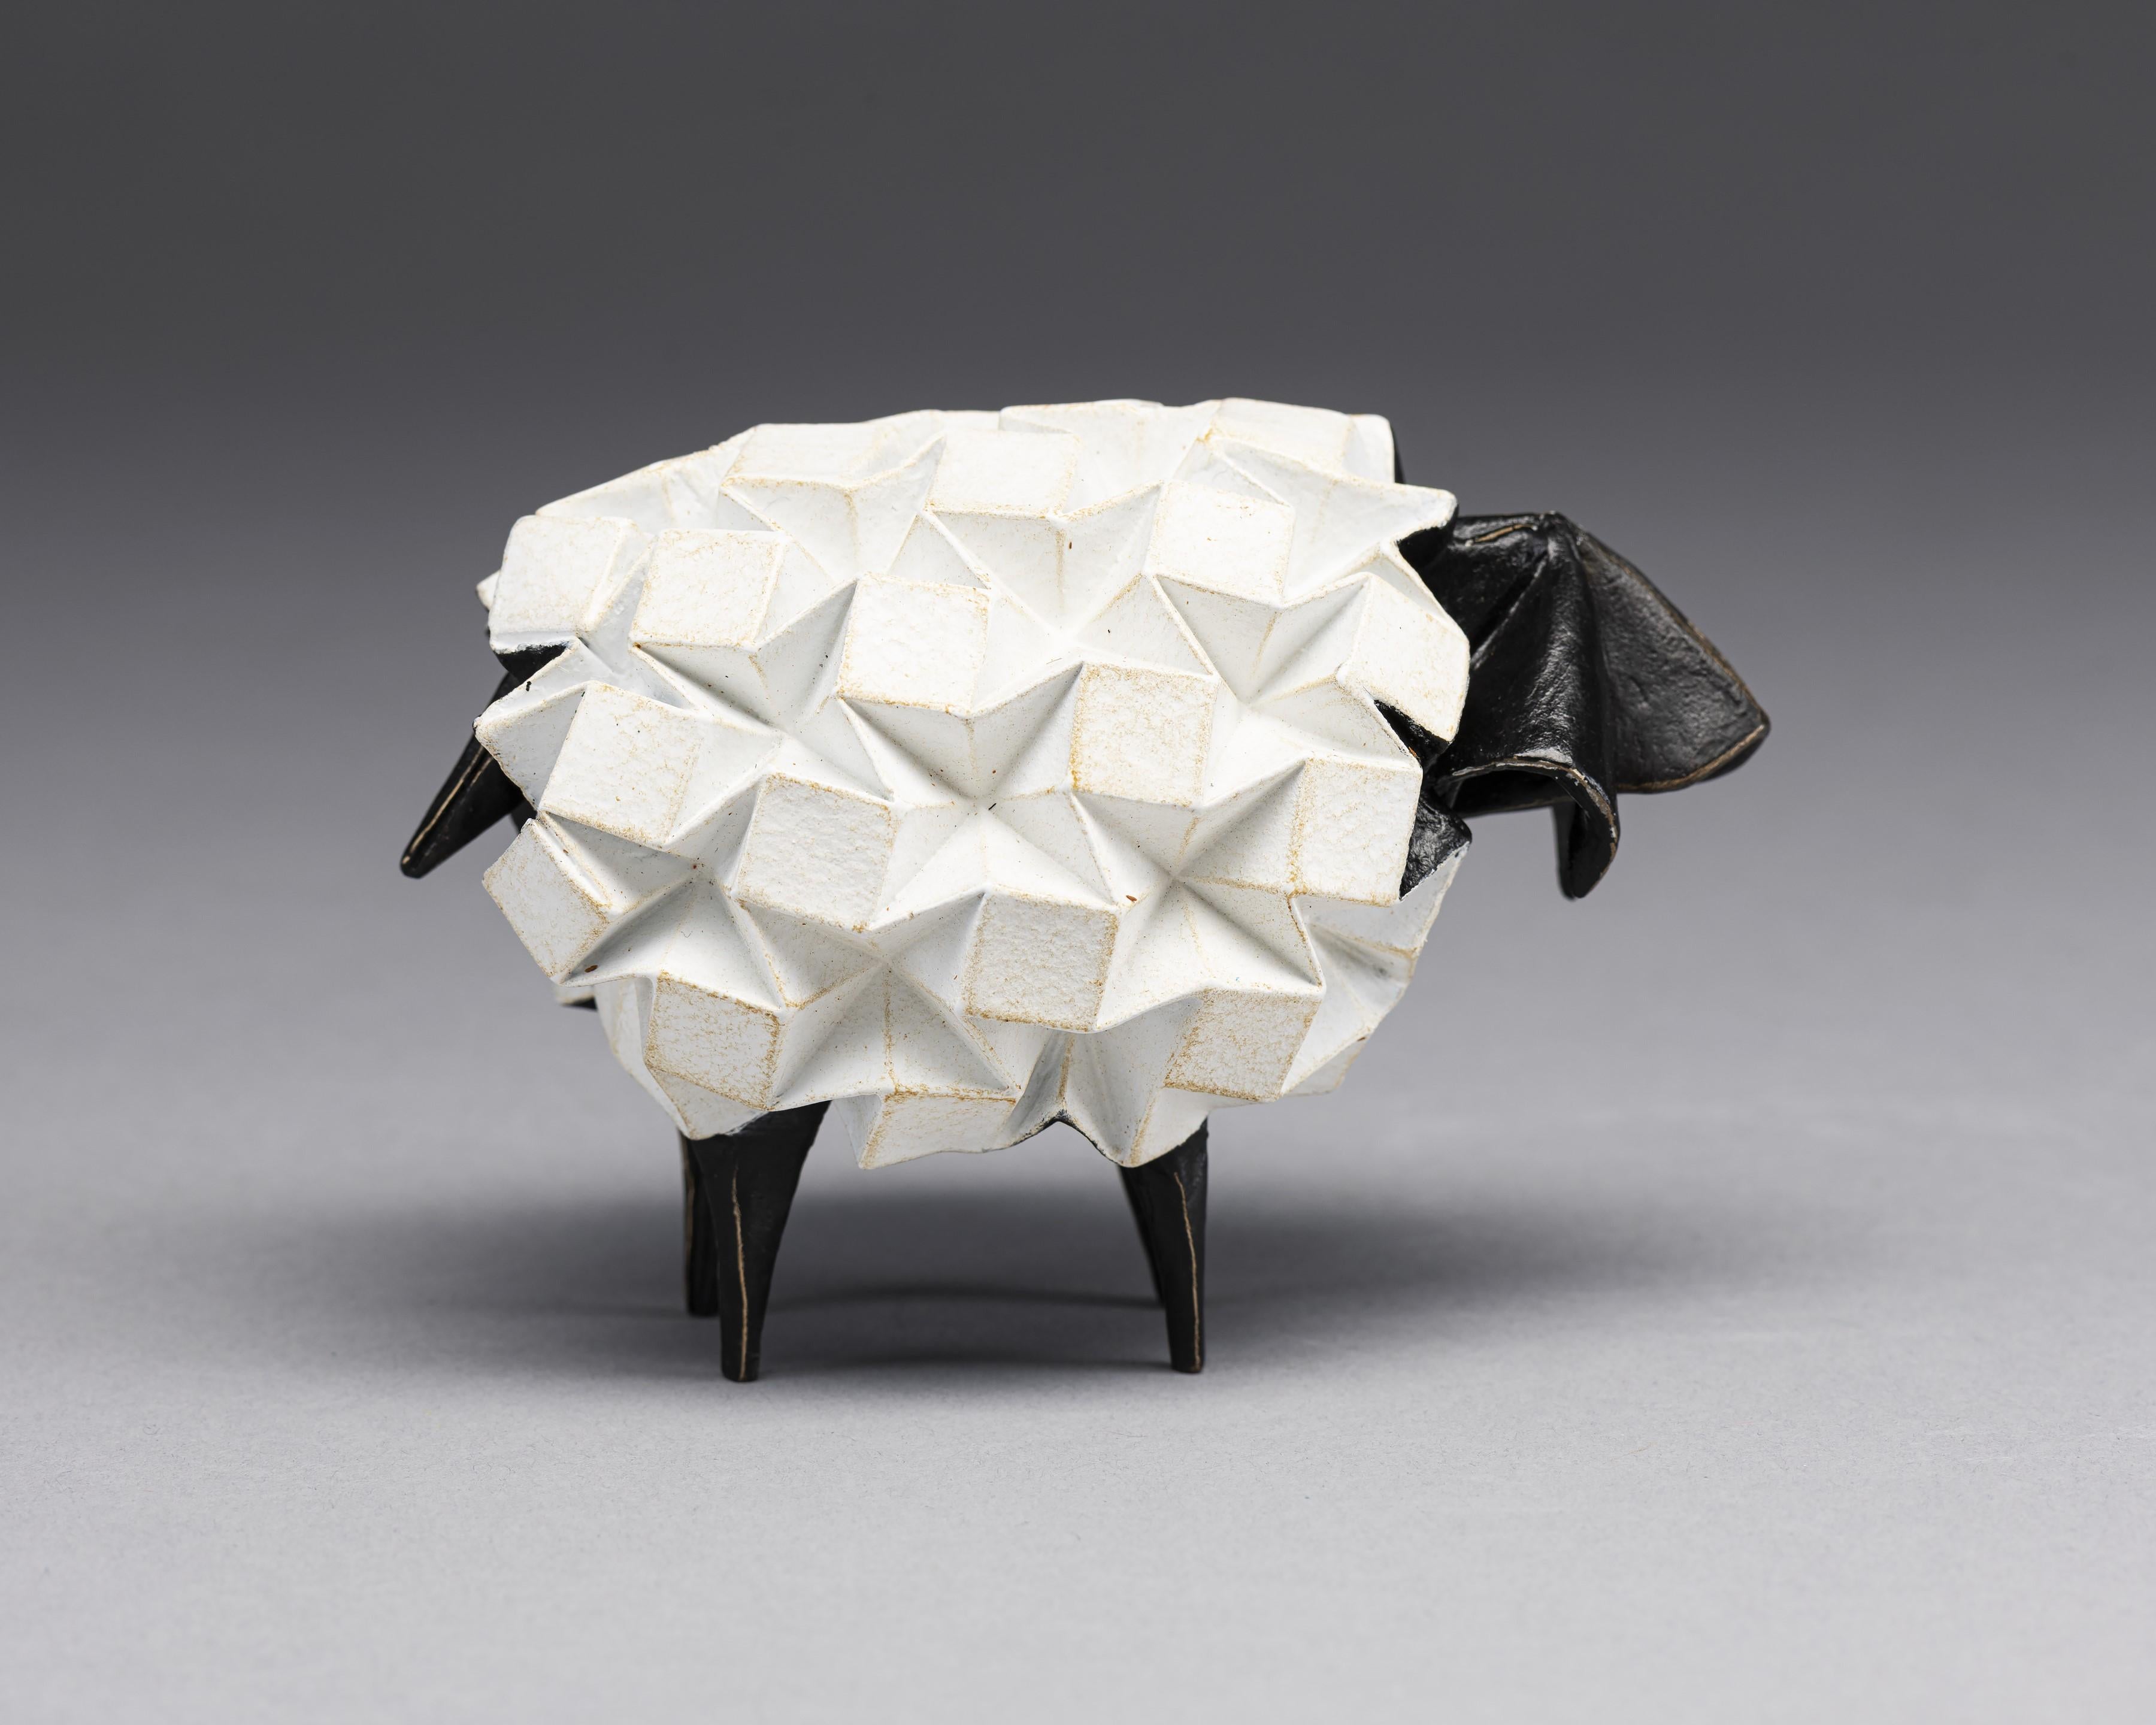 Kevin Box Abstract Sculpture - Ewe and Me (white) 17/500